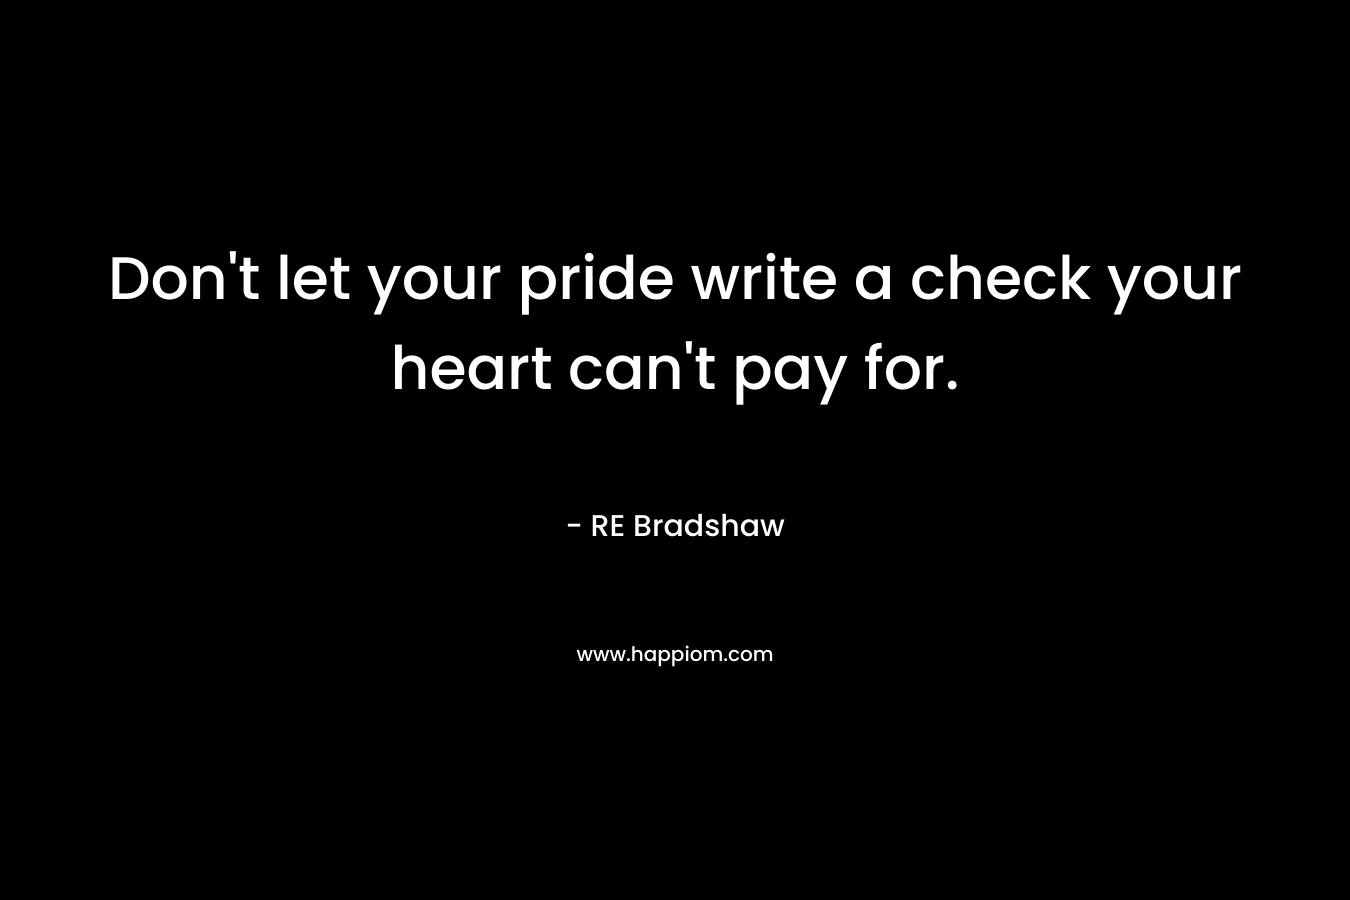 Don’t let your pride write a check your heart can’t pay for. – RE Bradshaw